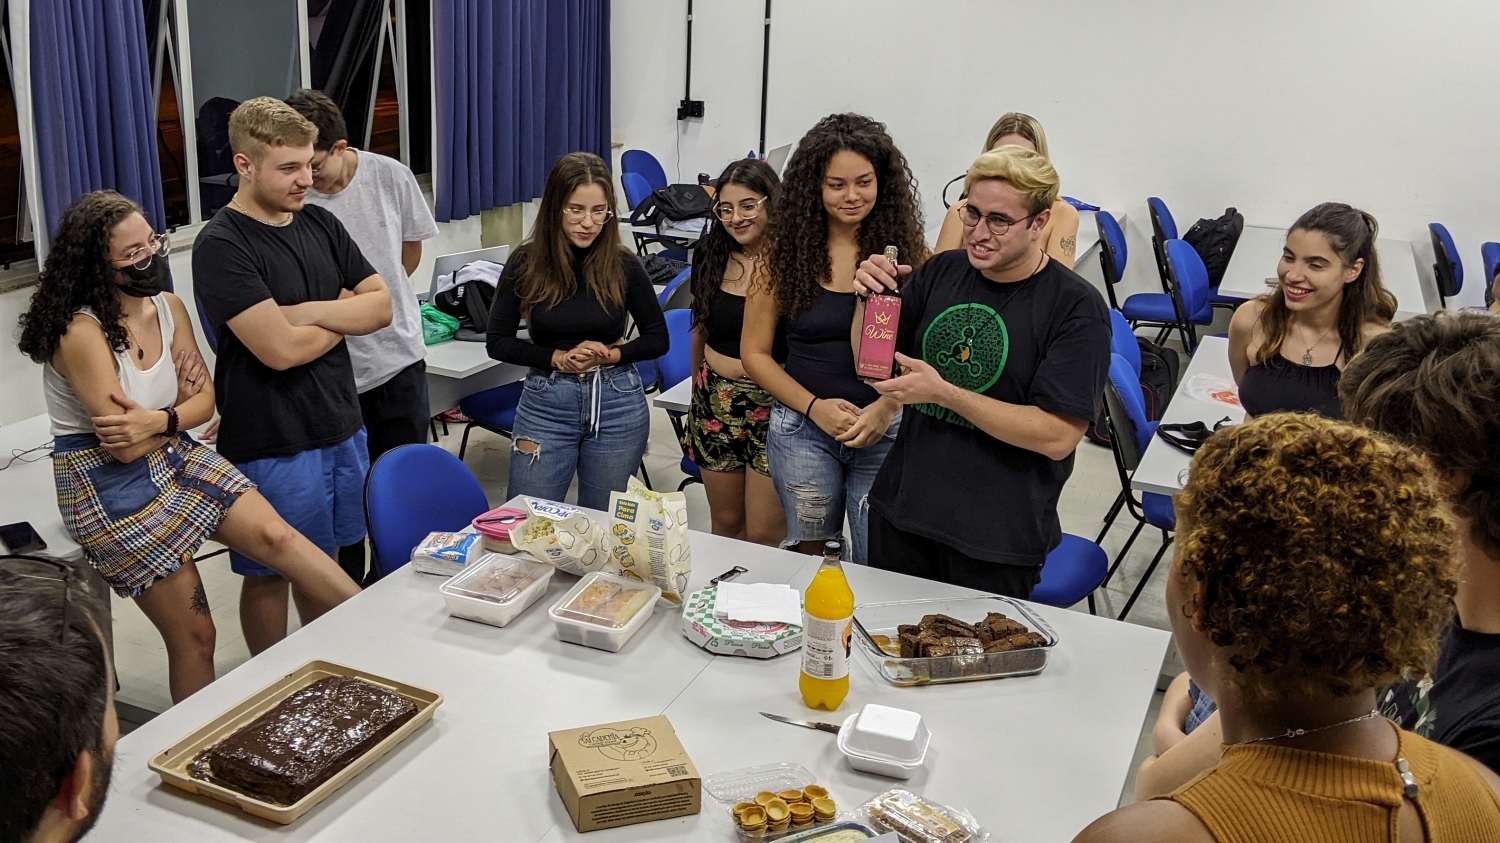 A group of students stands around a large table with food (a chocolate cake with a fish design on it, various other cakes, popcorn, and juices). The student in the center is showing off a bottle wine that comes from their fictional country's famous wine-production region.